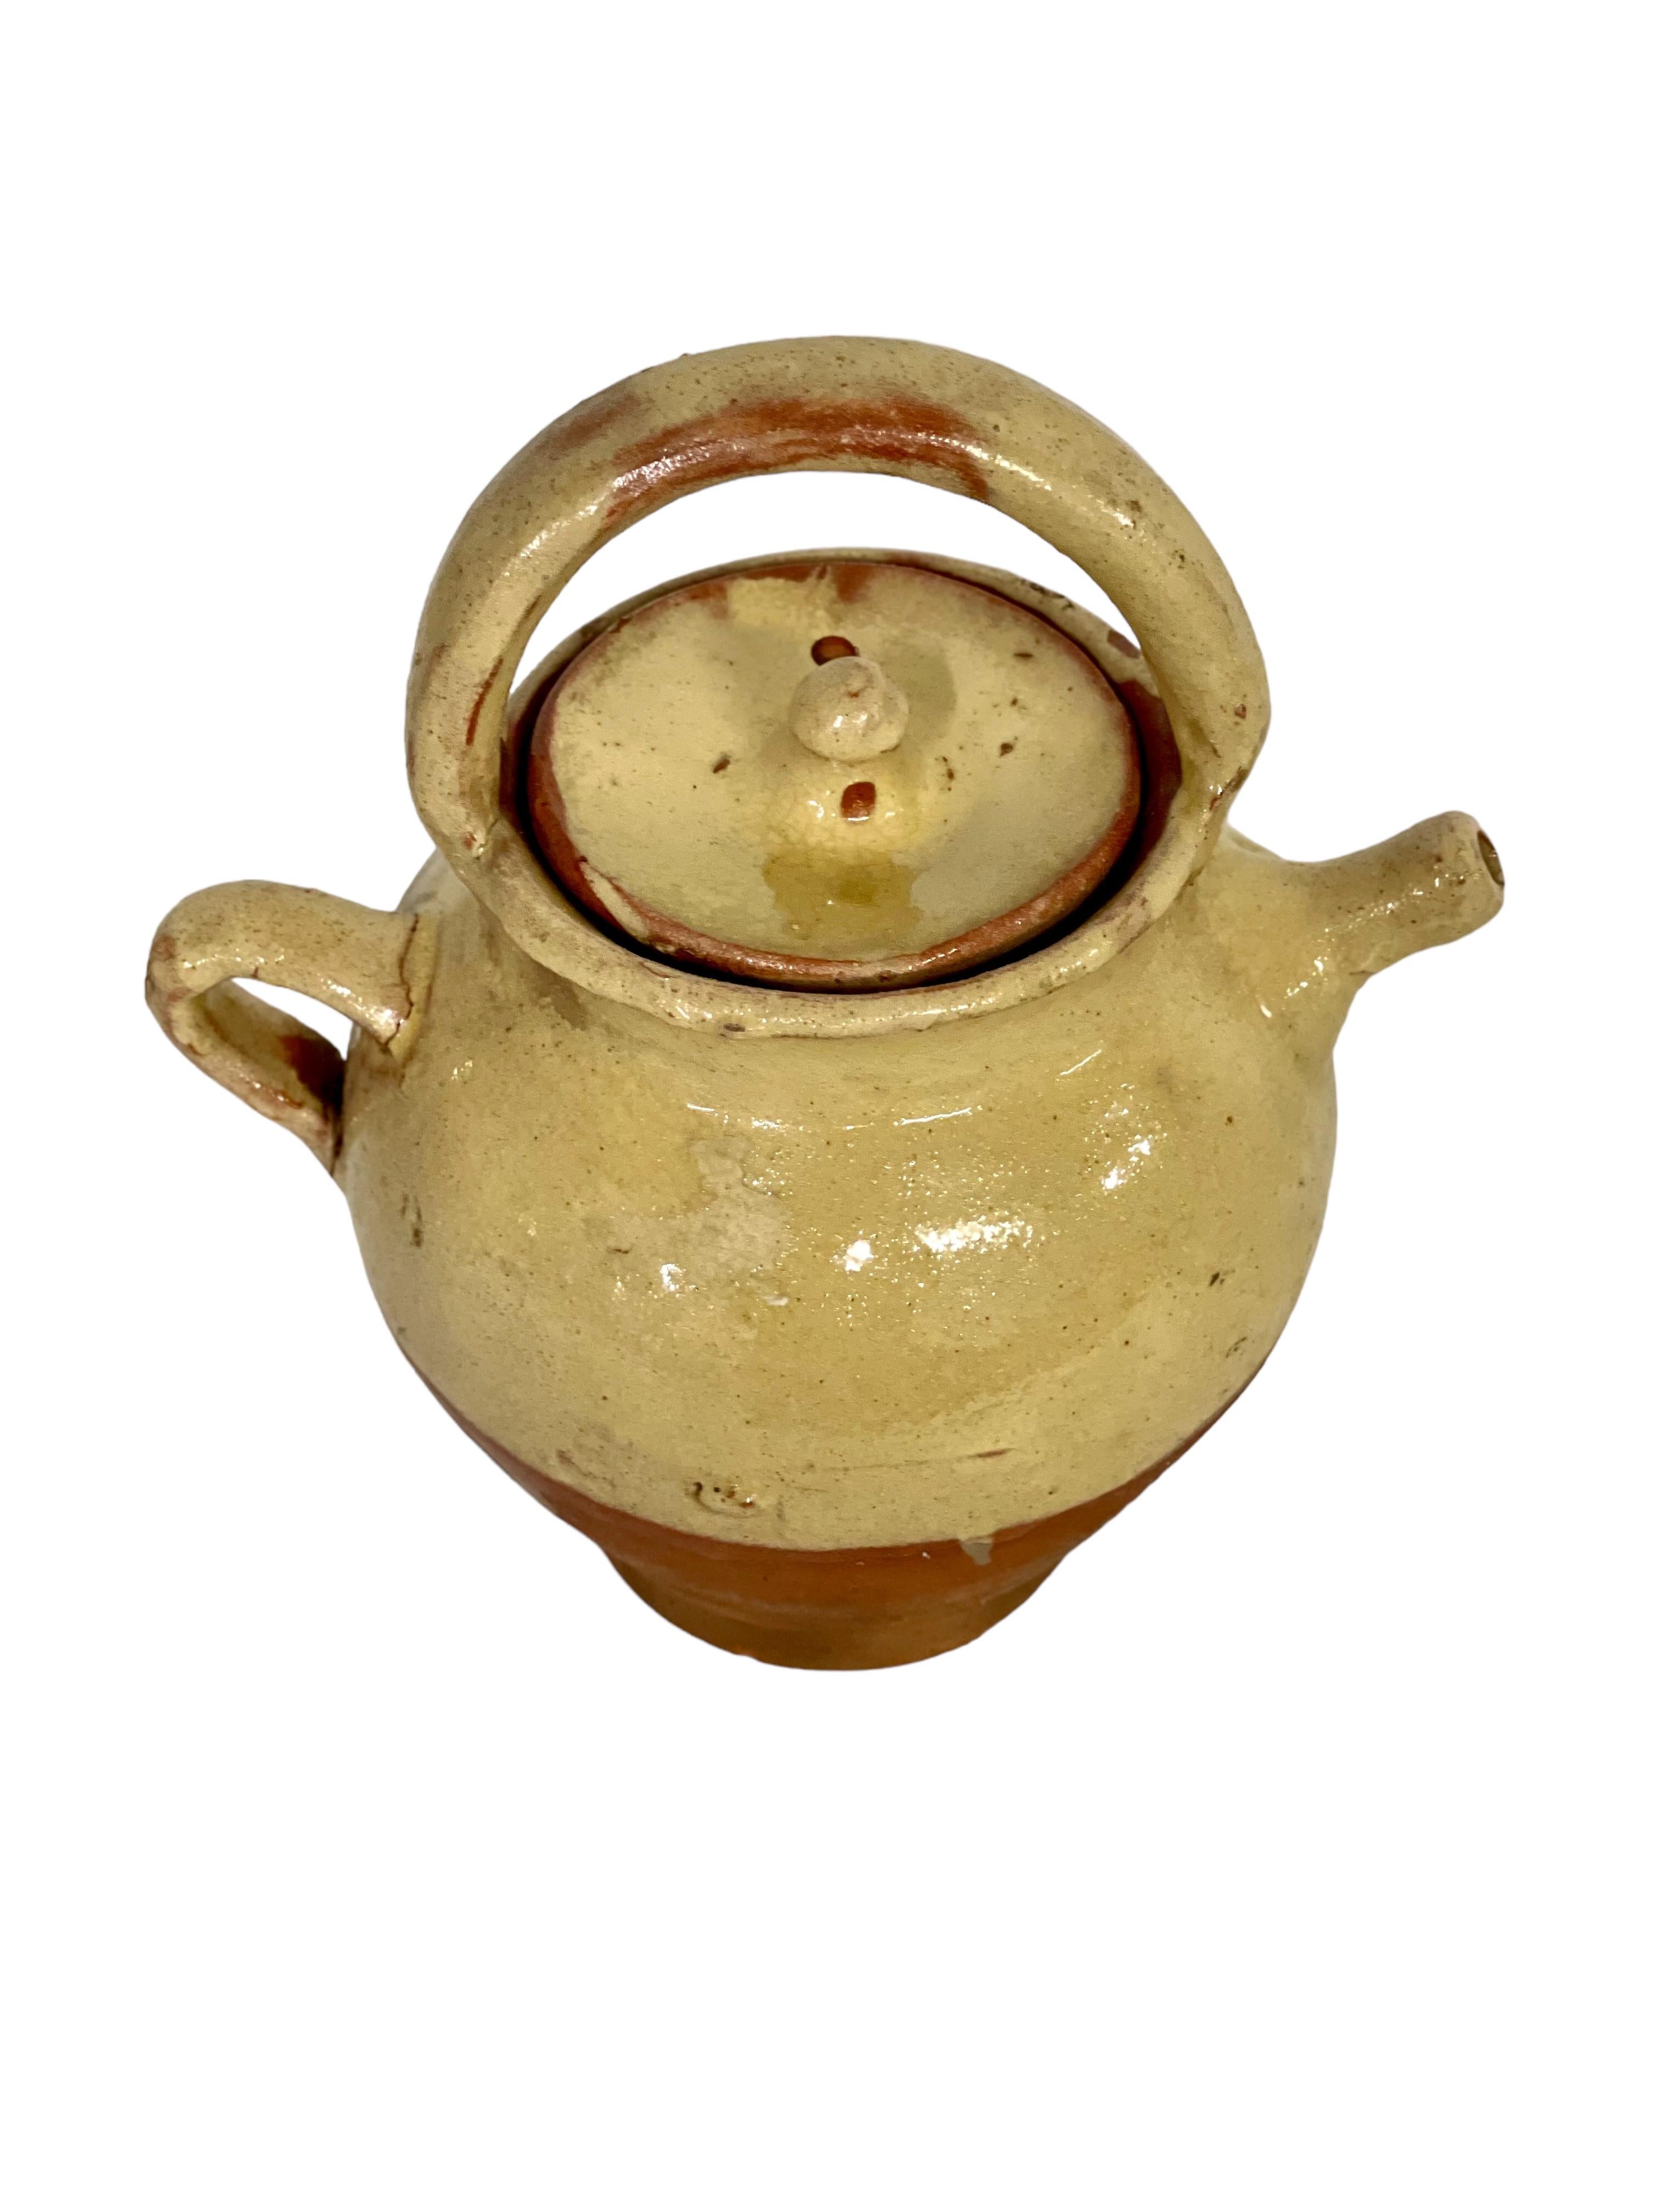 A petite and very charming half-glazed water cruche, with side and top handle, spout and original lid. It would have originally been used to transport water to workers in the farm fields, keeping it cool and clean ready for drinking. Vessels that